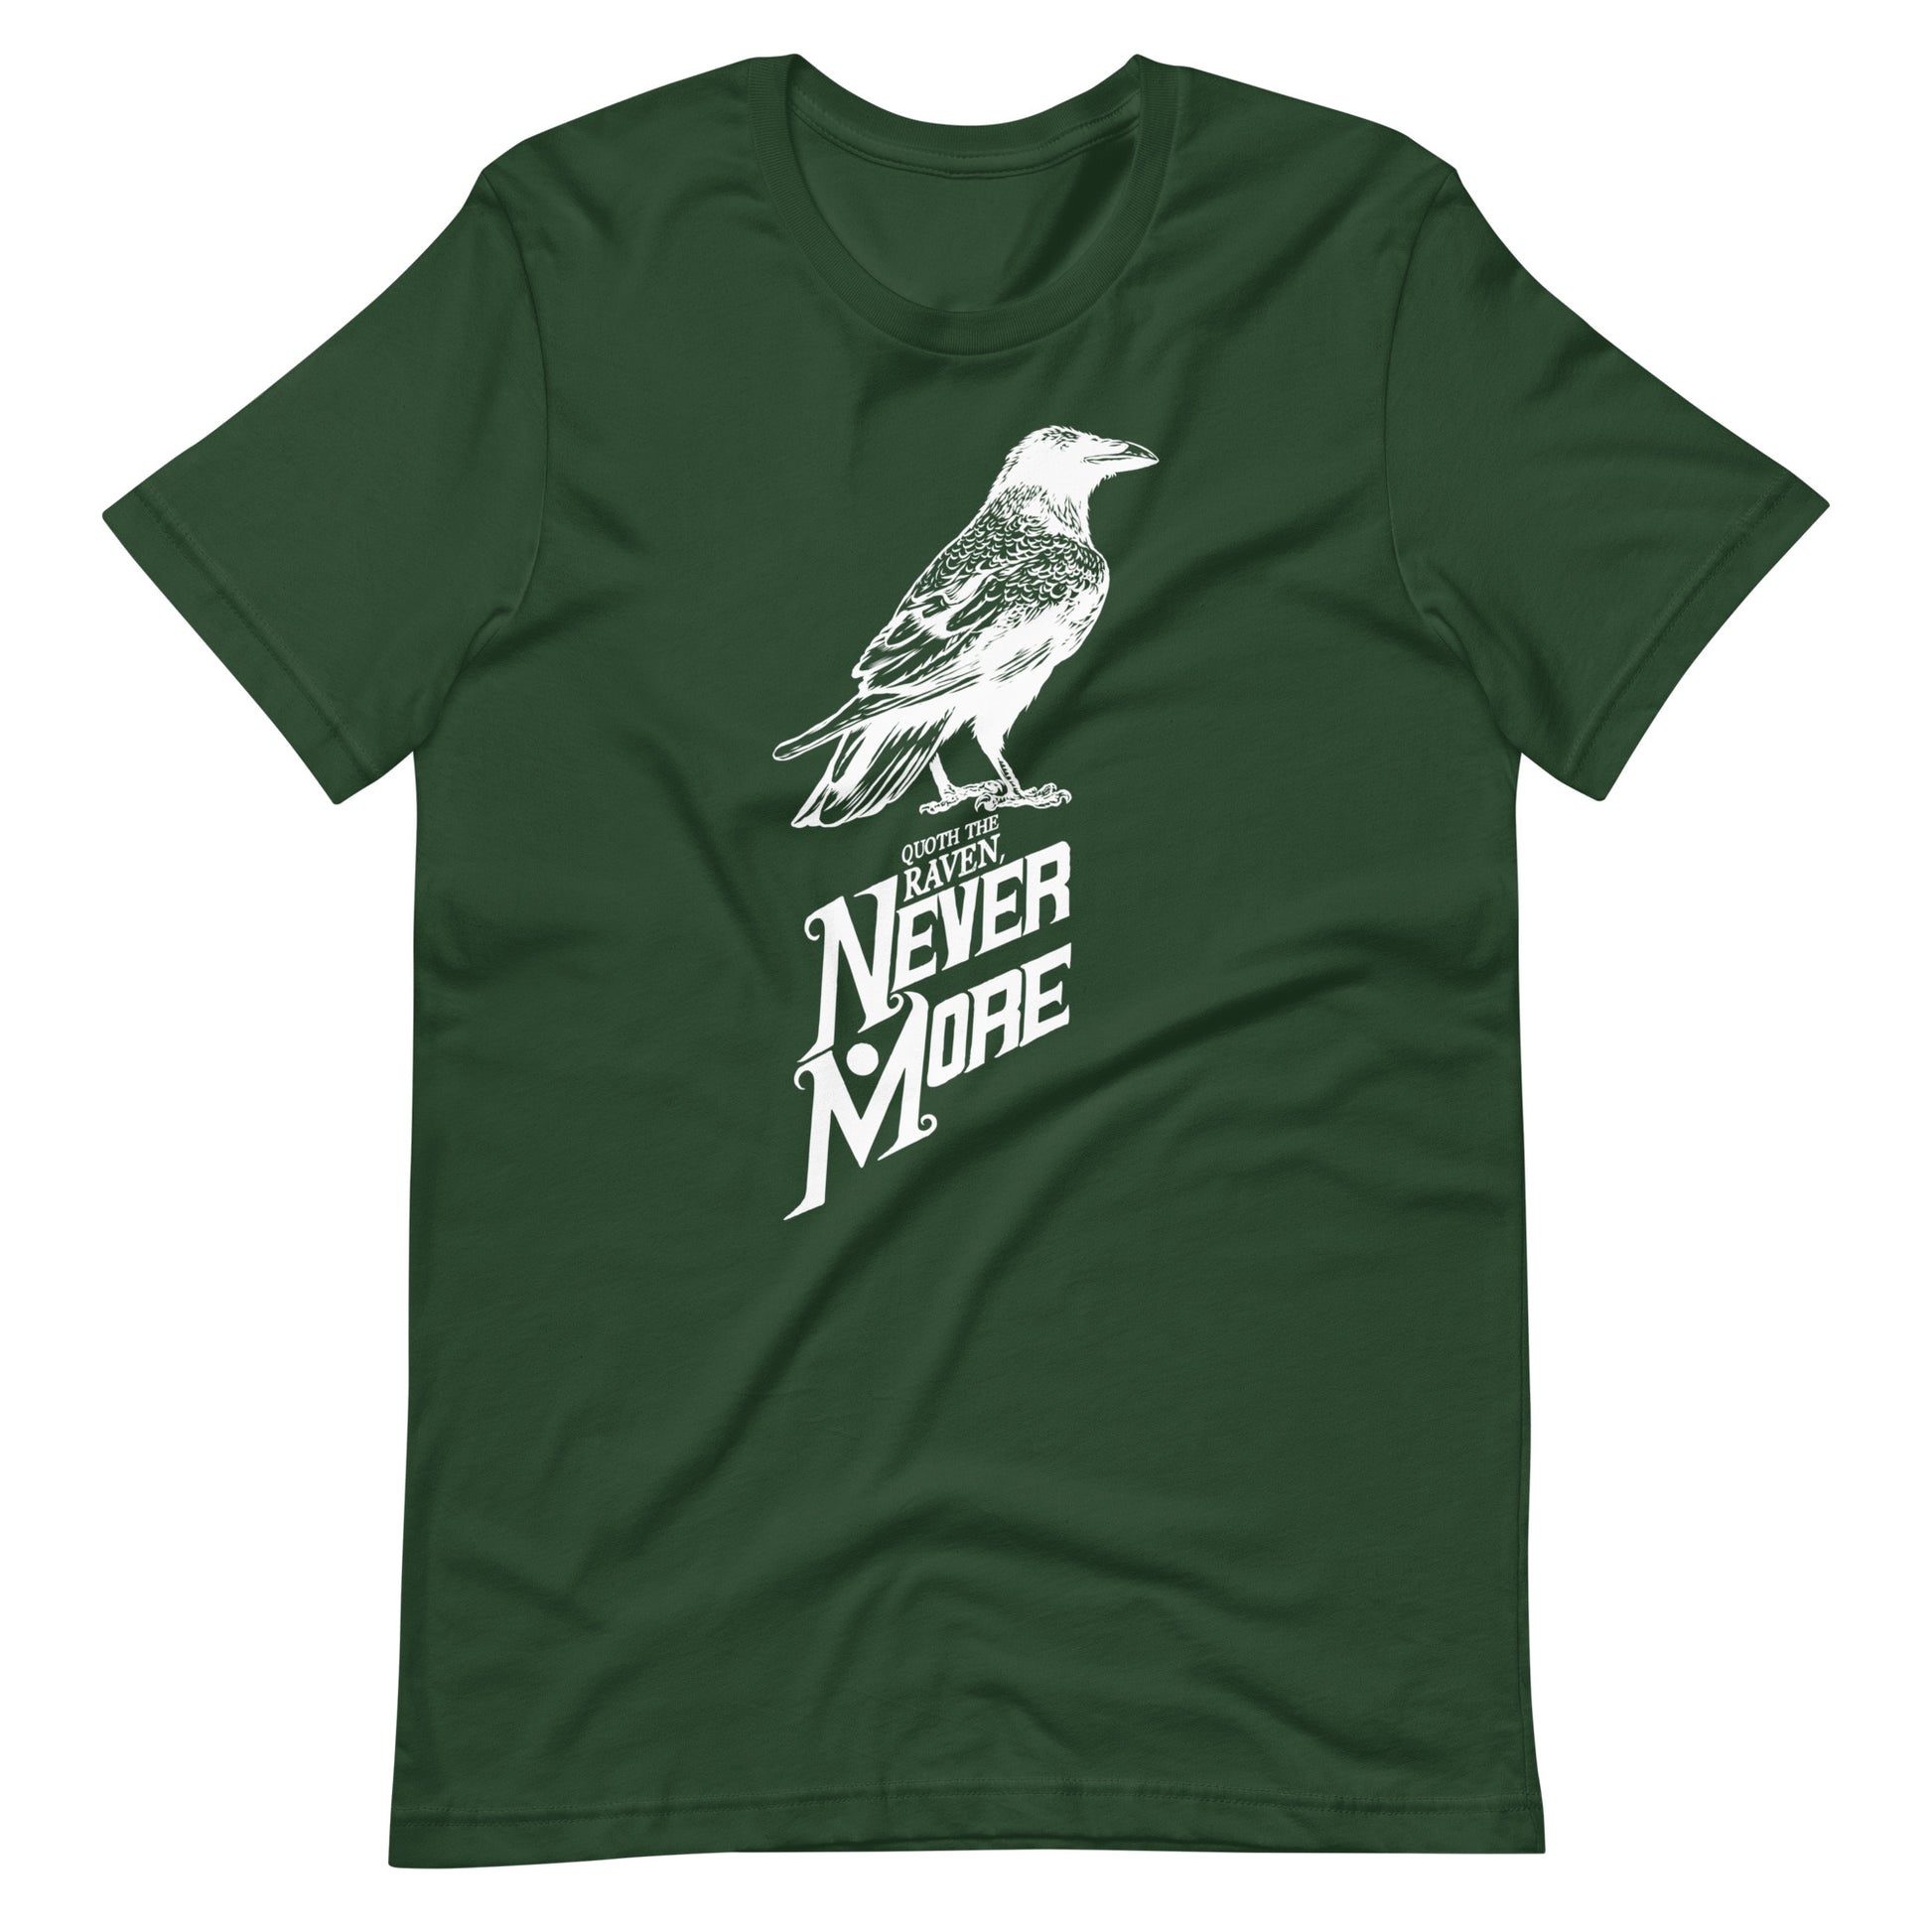 Quoth the Raven Nevermore - Men's t-shirt - Forest Front